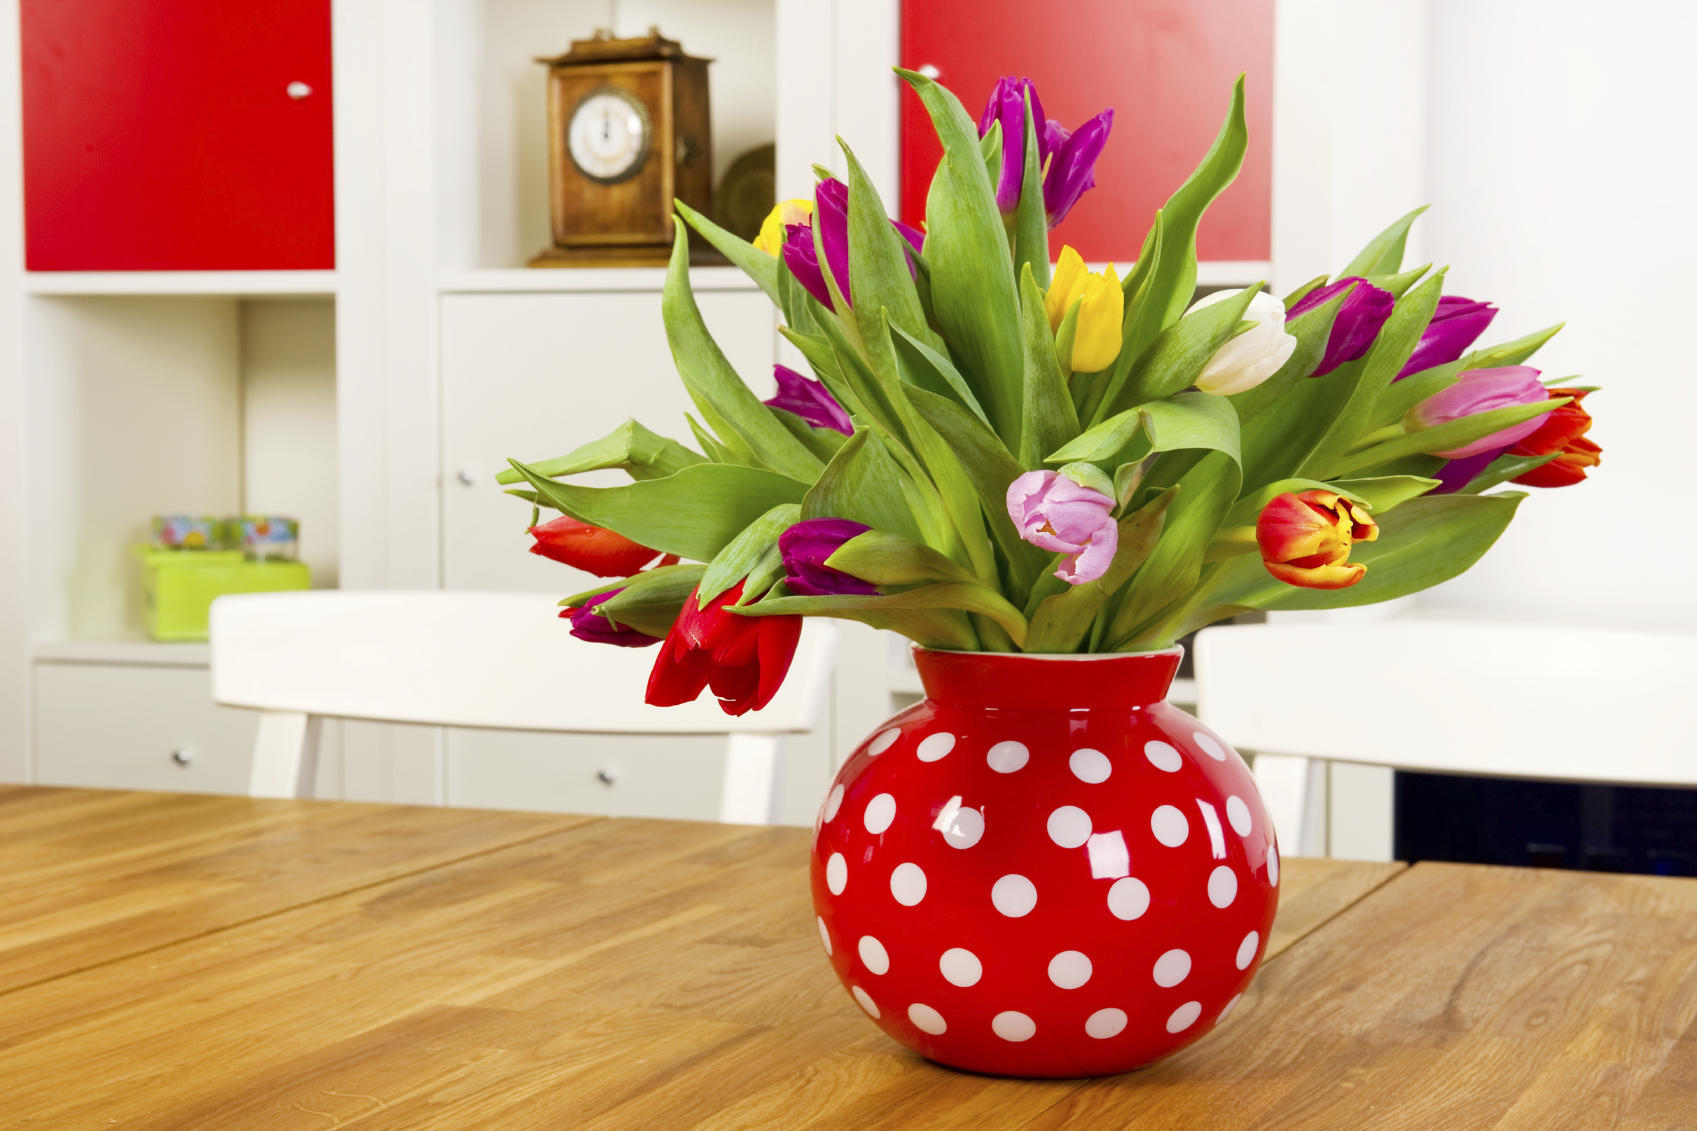 Refresh your home this Spring with simple 5 steps